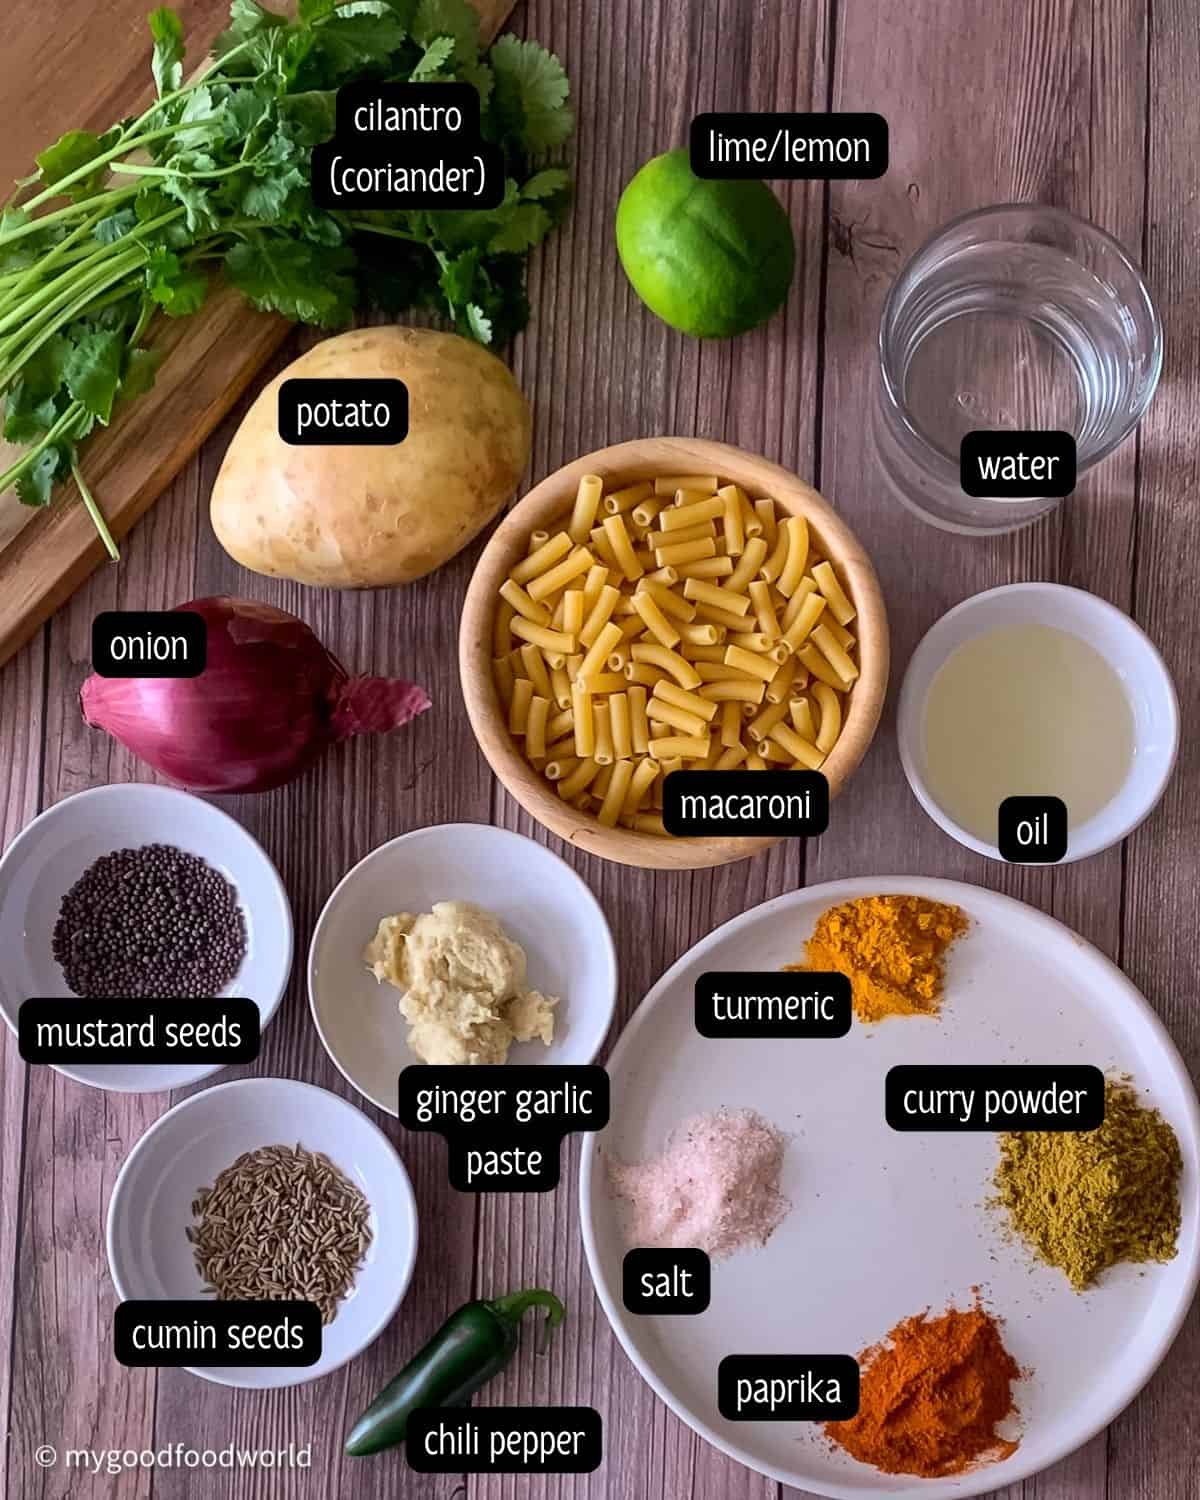 Ingredients for pasta and potato recipe such as macaroni, onion, ginger garlic pasta, cumin, lemon, chili pepper, potatoes, and oil are placed in small white bowls and plates and arranged next to each other on a brown background.